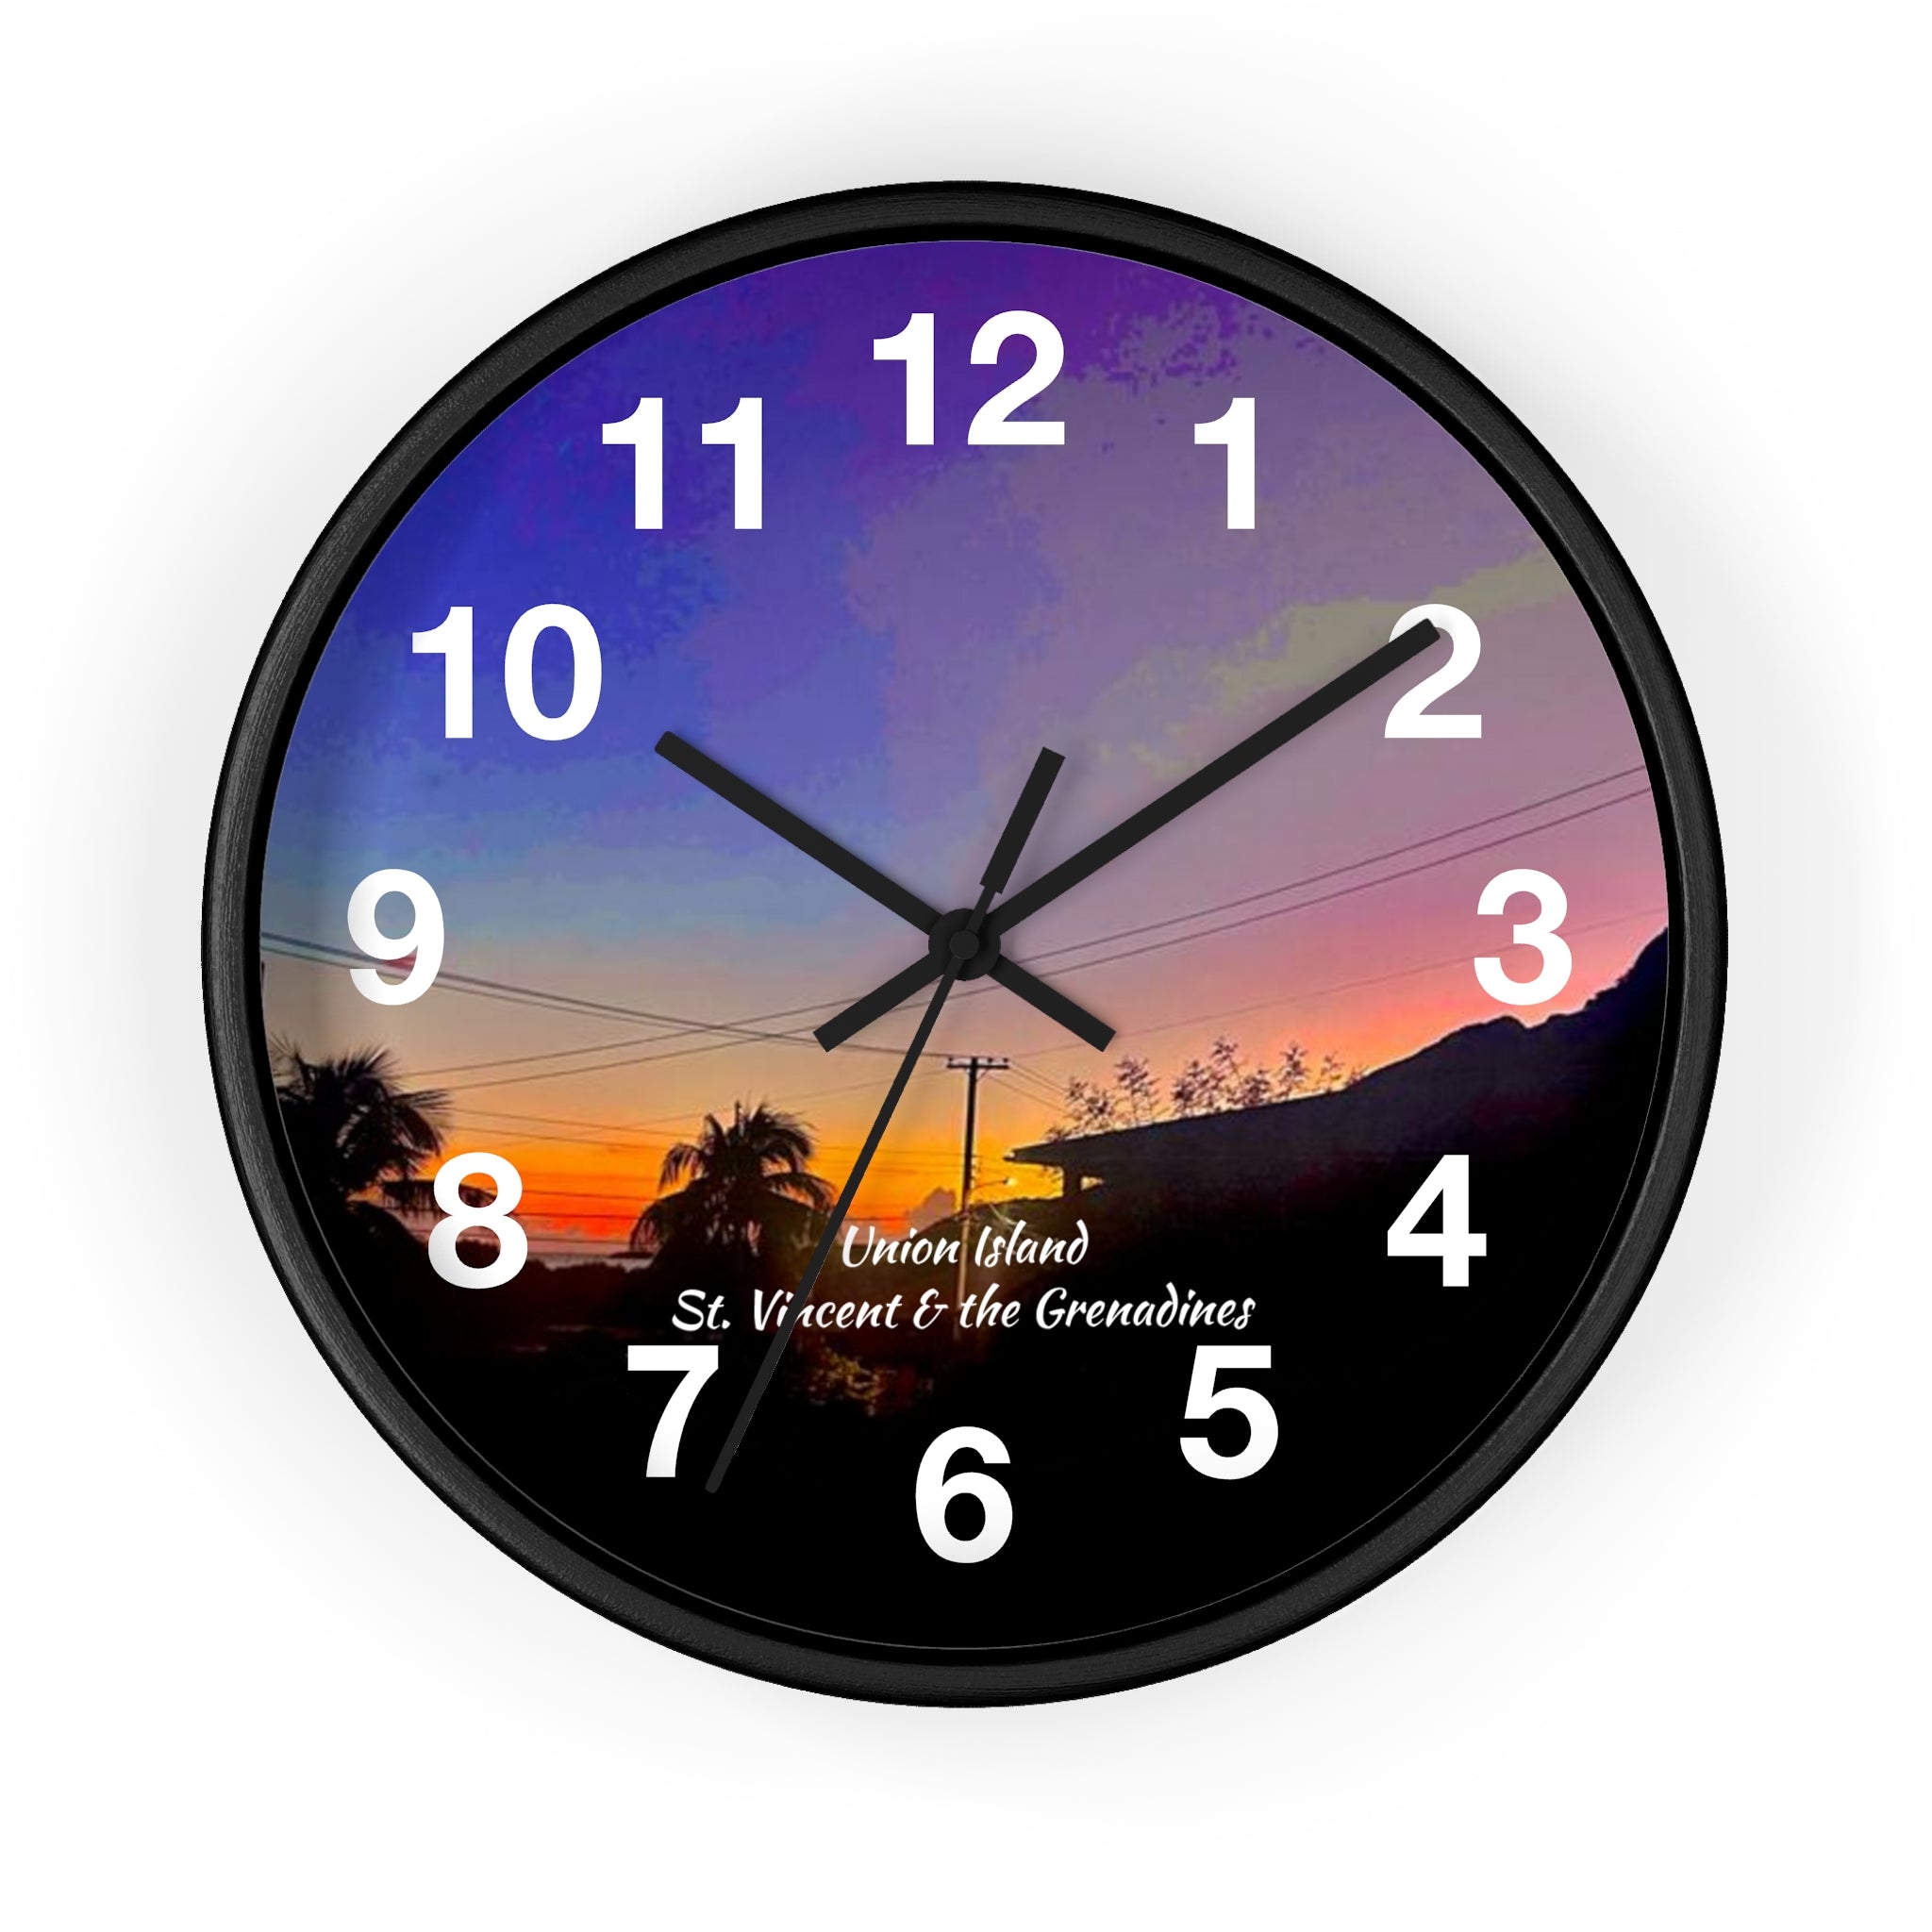 Union Island Sunset Wall Clock, Union Island St. Vincent and the Grenadines Sunset Wall Clock